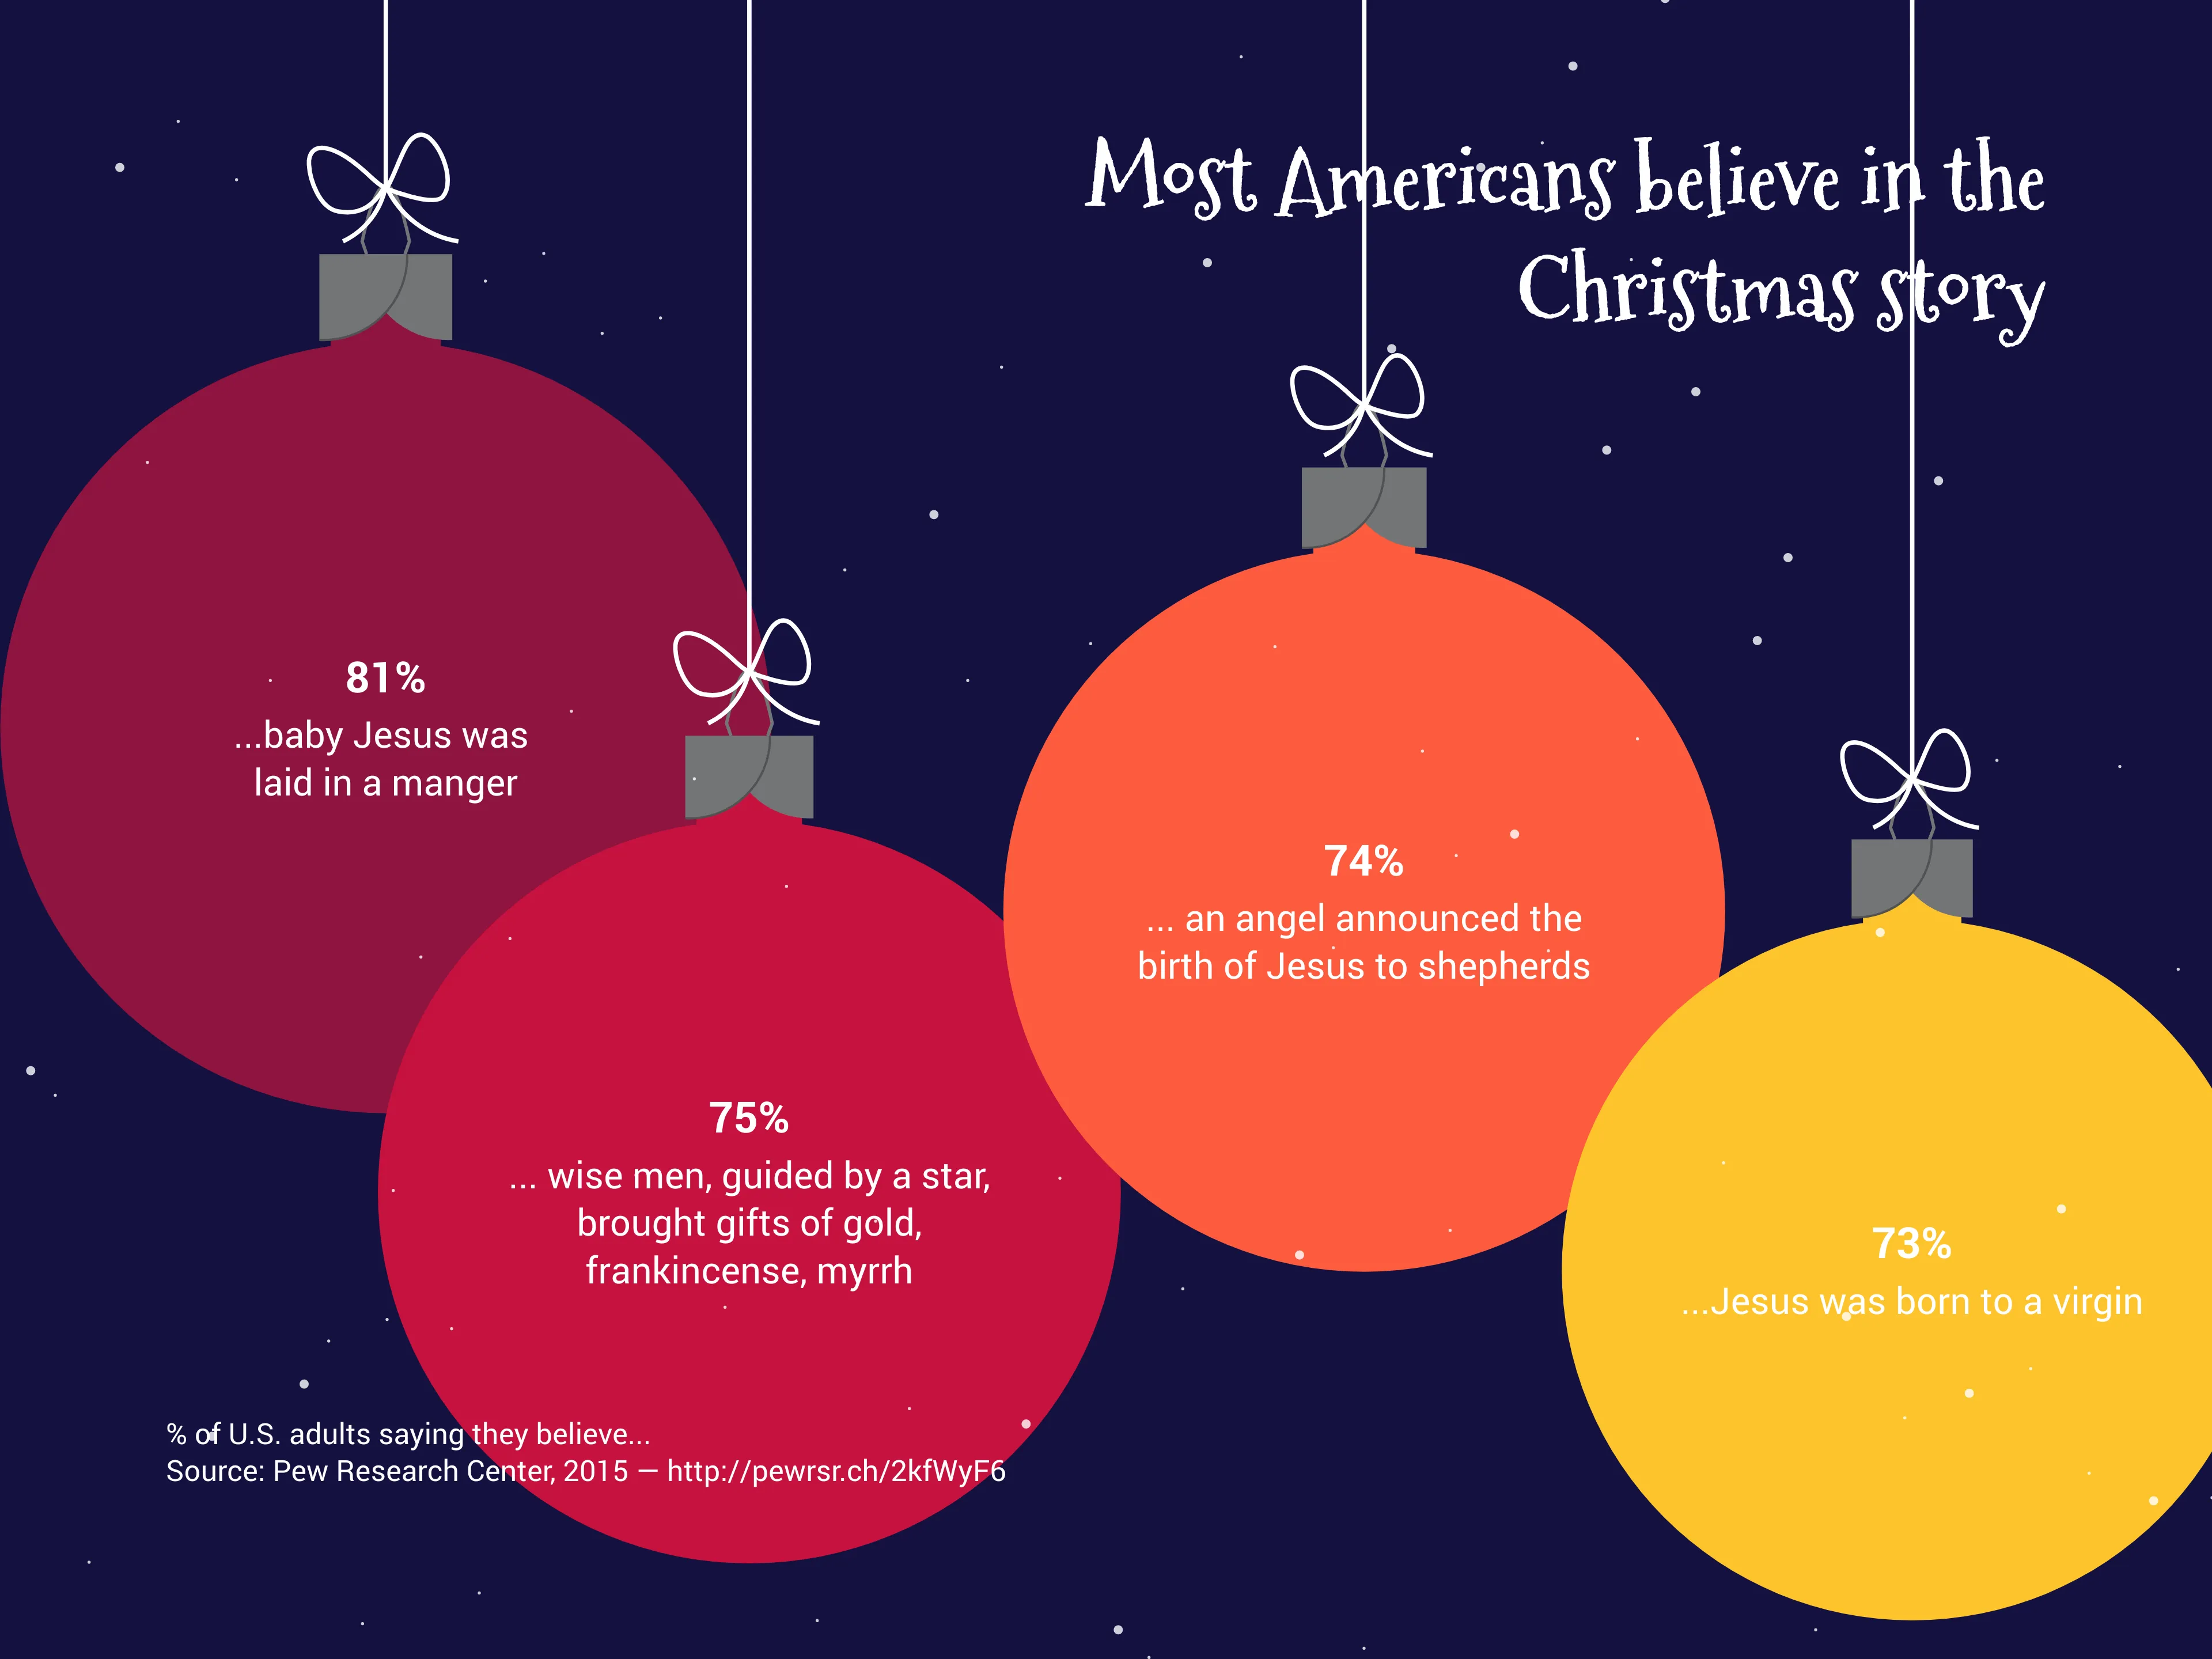 Most Americans believe in the Christmas story